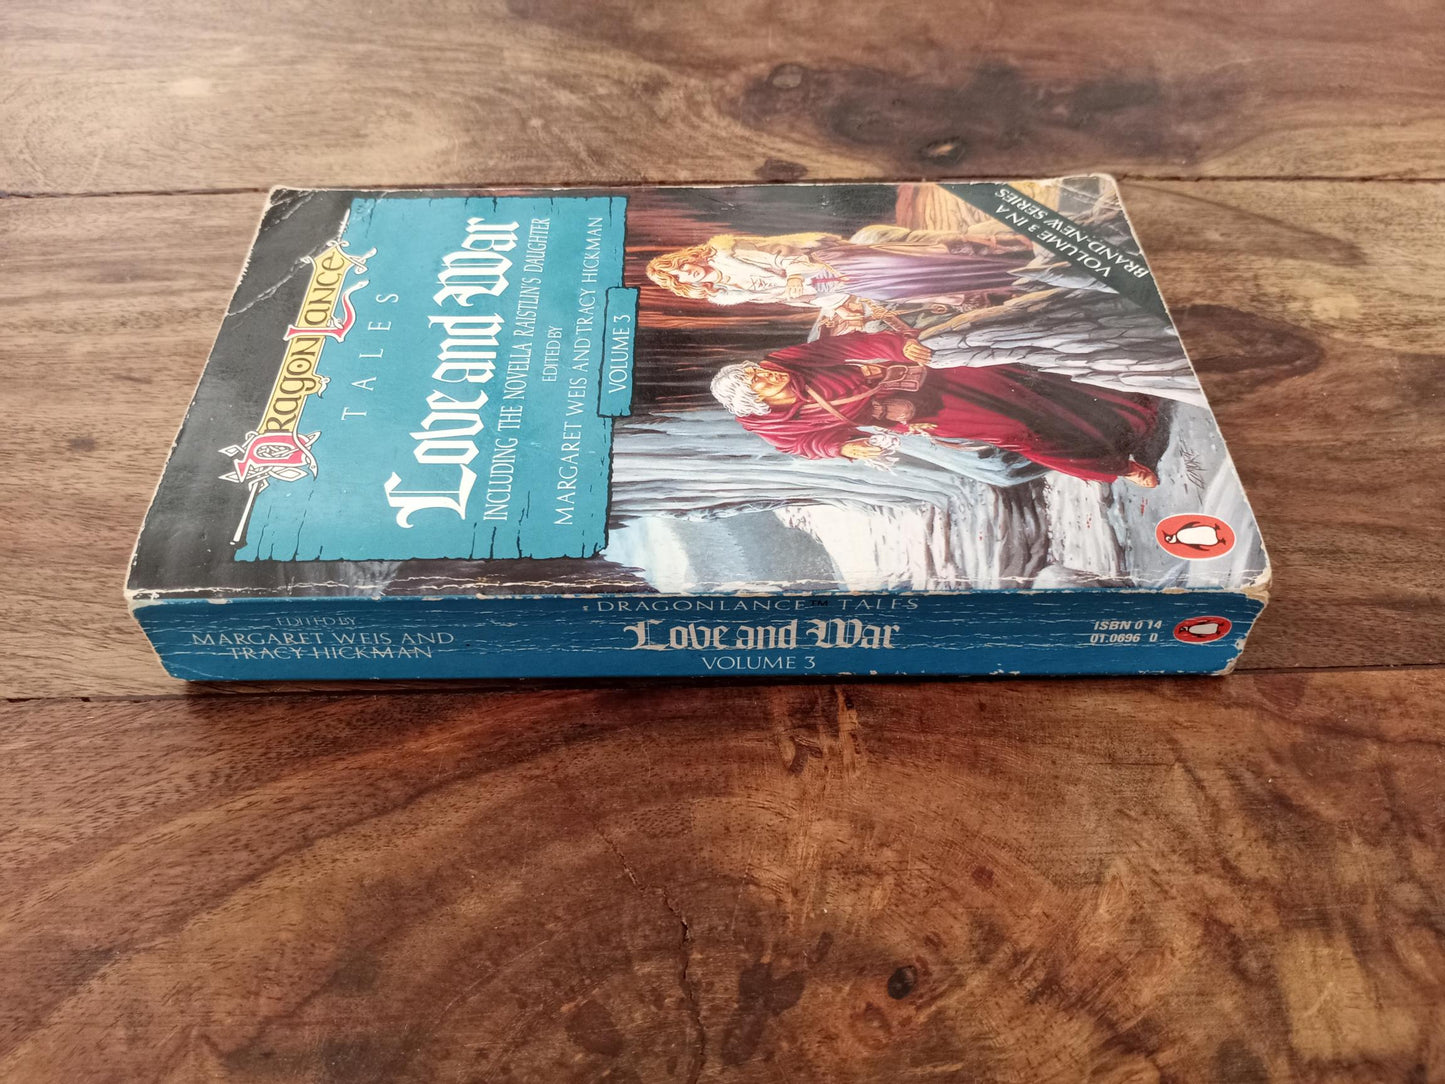 DragonLance Love and War Tales #3 Margaret Weis & Tracy Hickman 1987